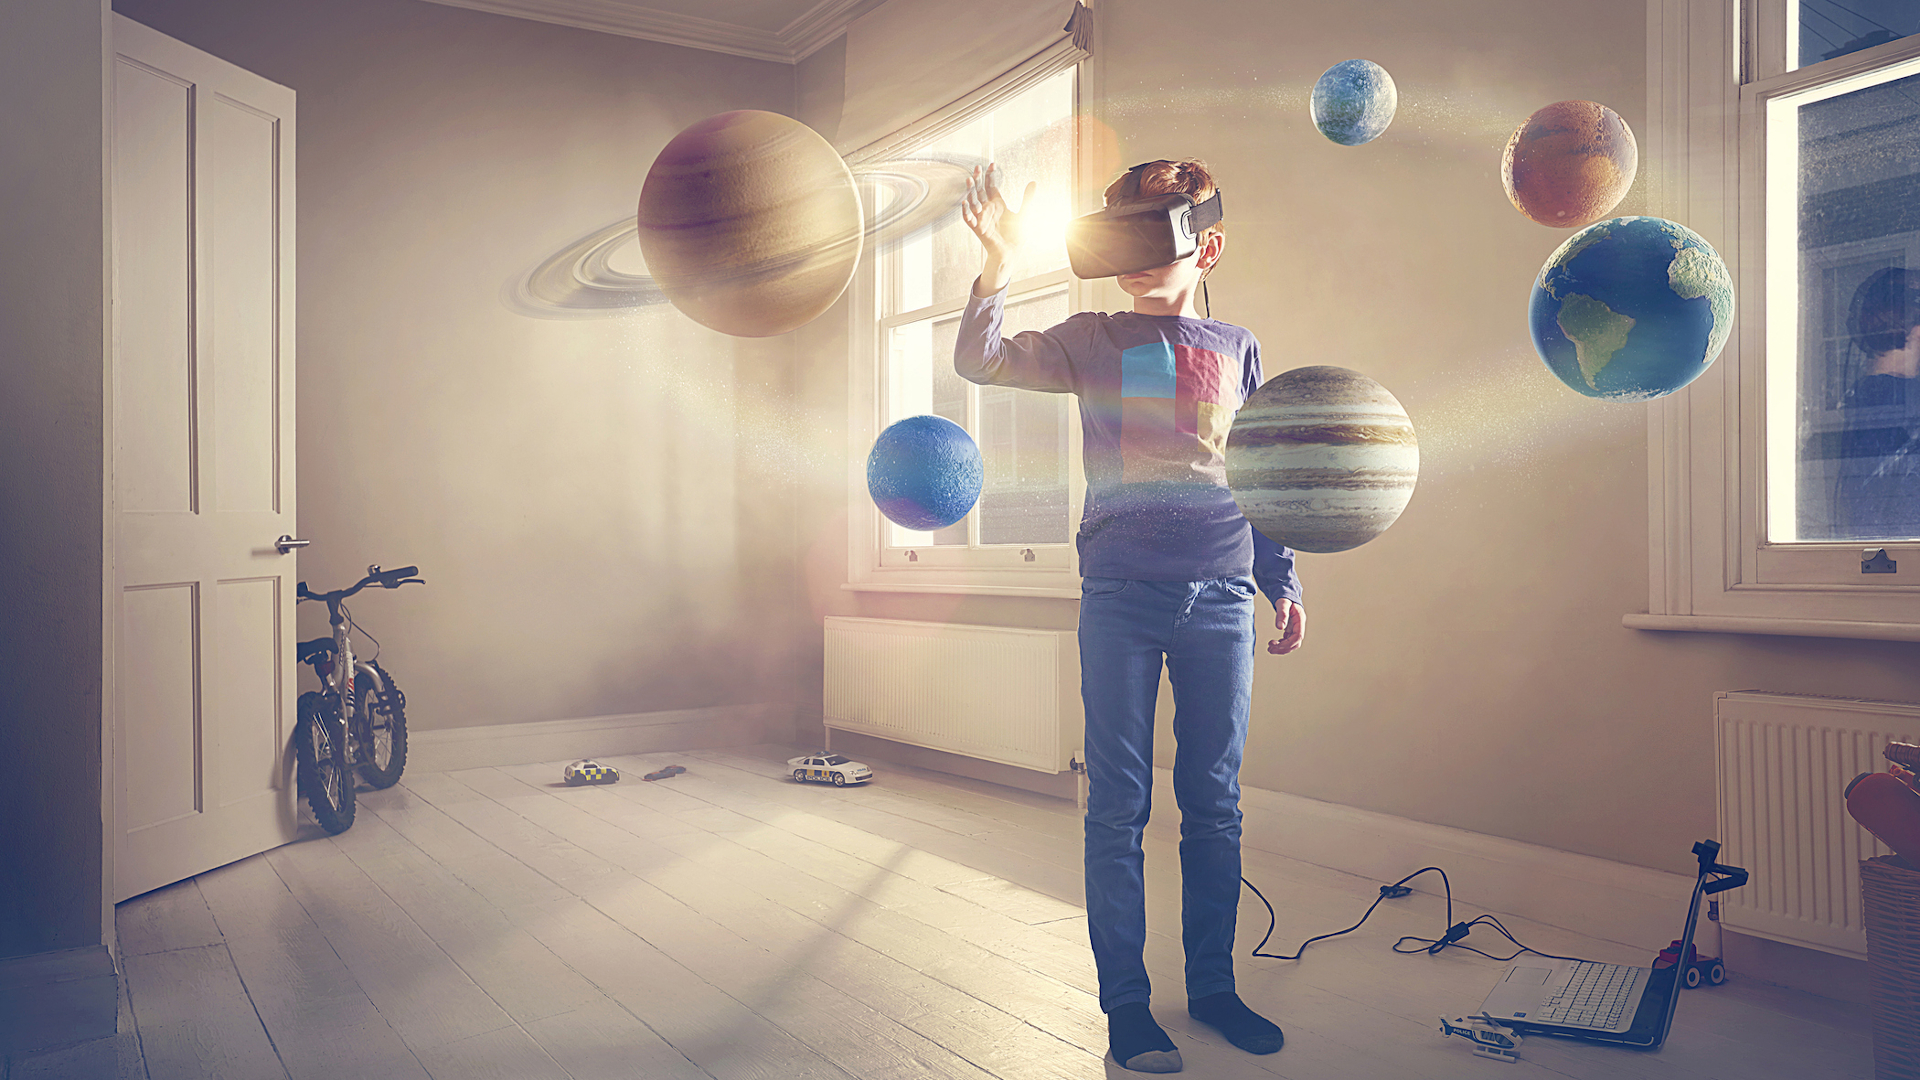 How to set up your room for VR Space